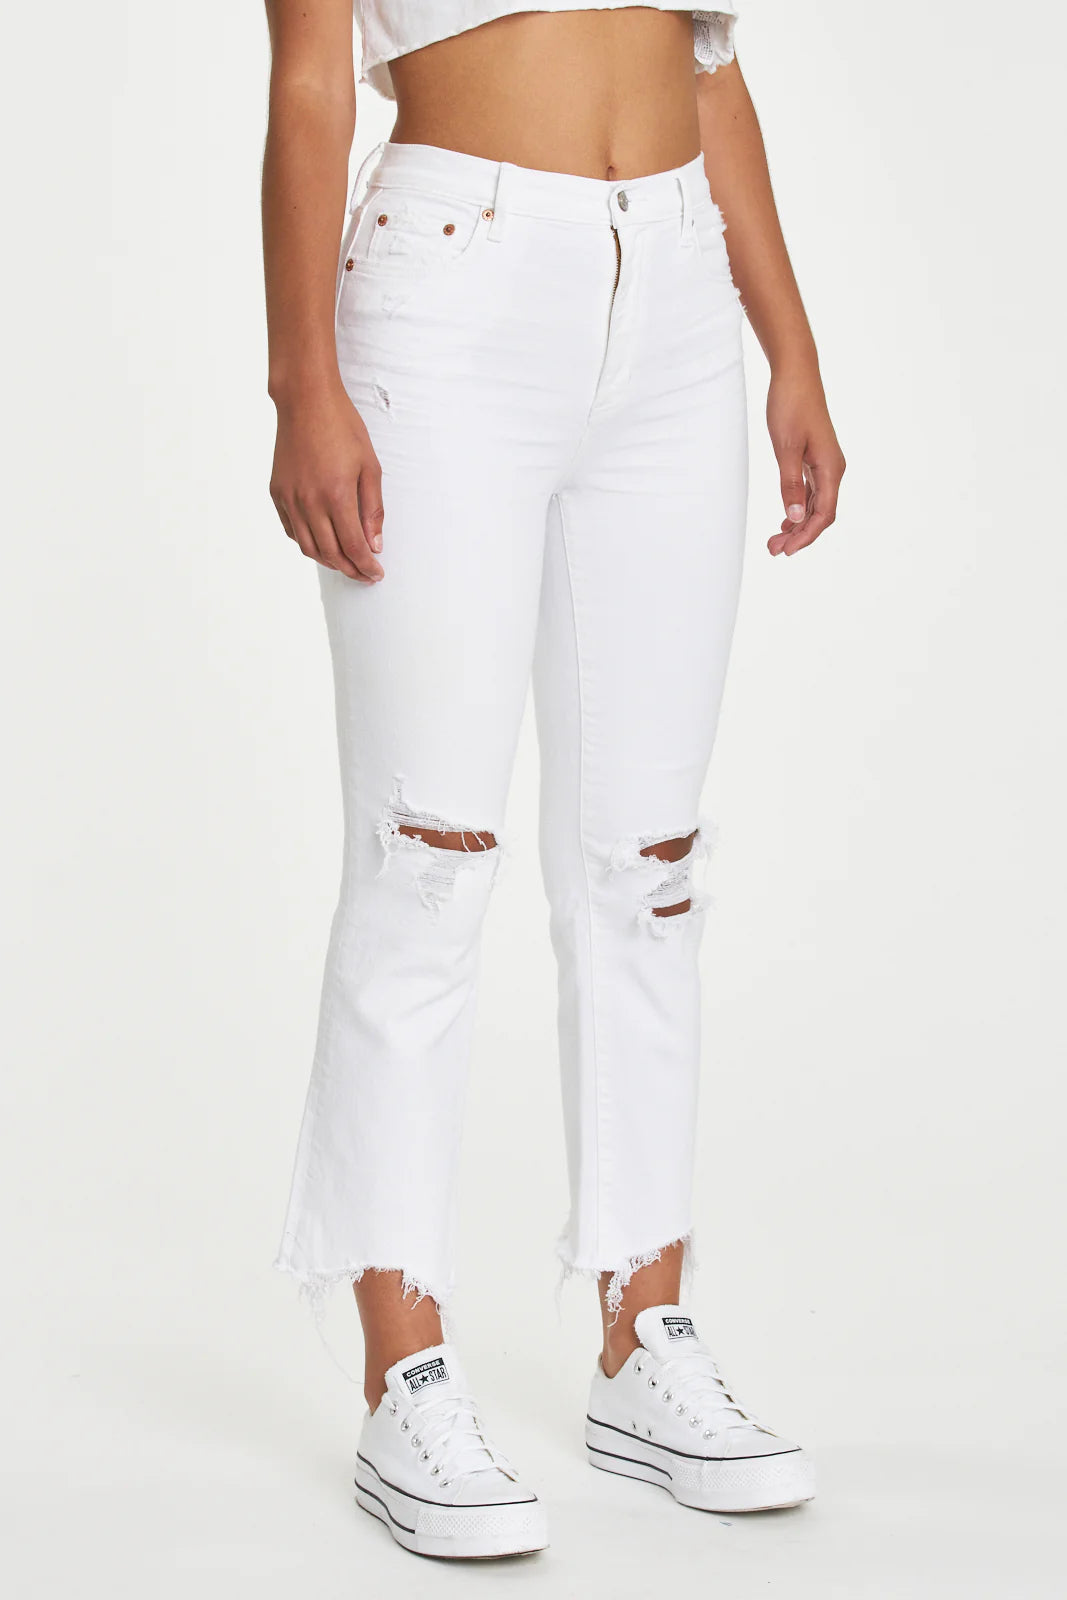 Shy Girl Flare Jeans